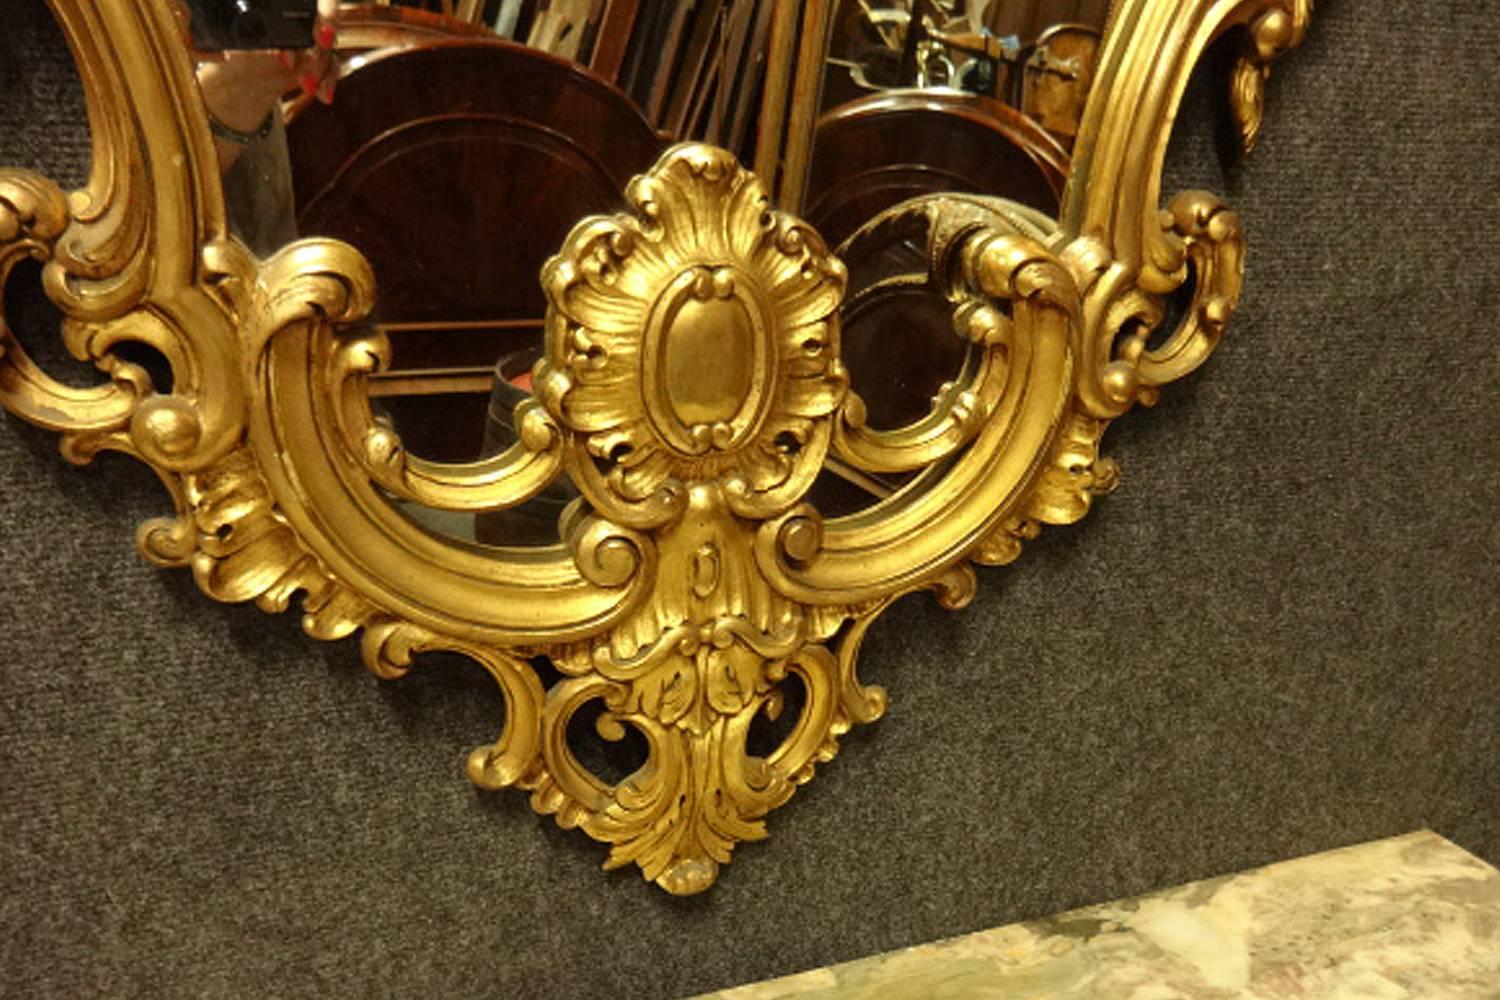 Rococo French Gilt amd Marble Topped Console Table with Matching Mirror early C20th For Sale